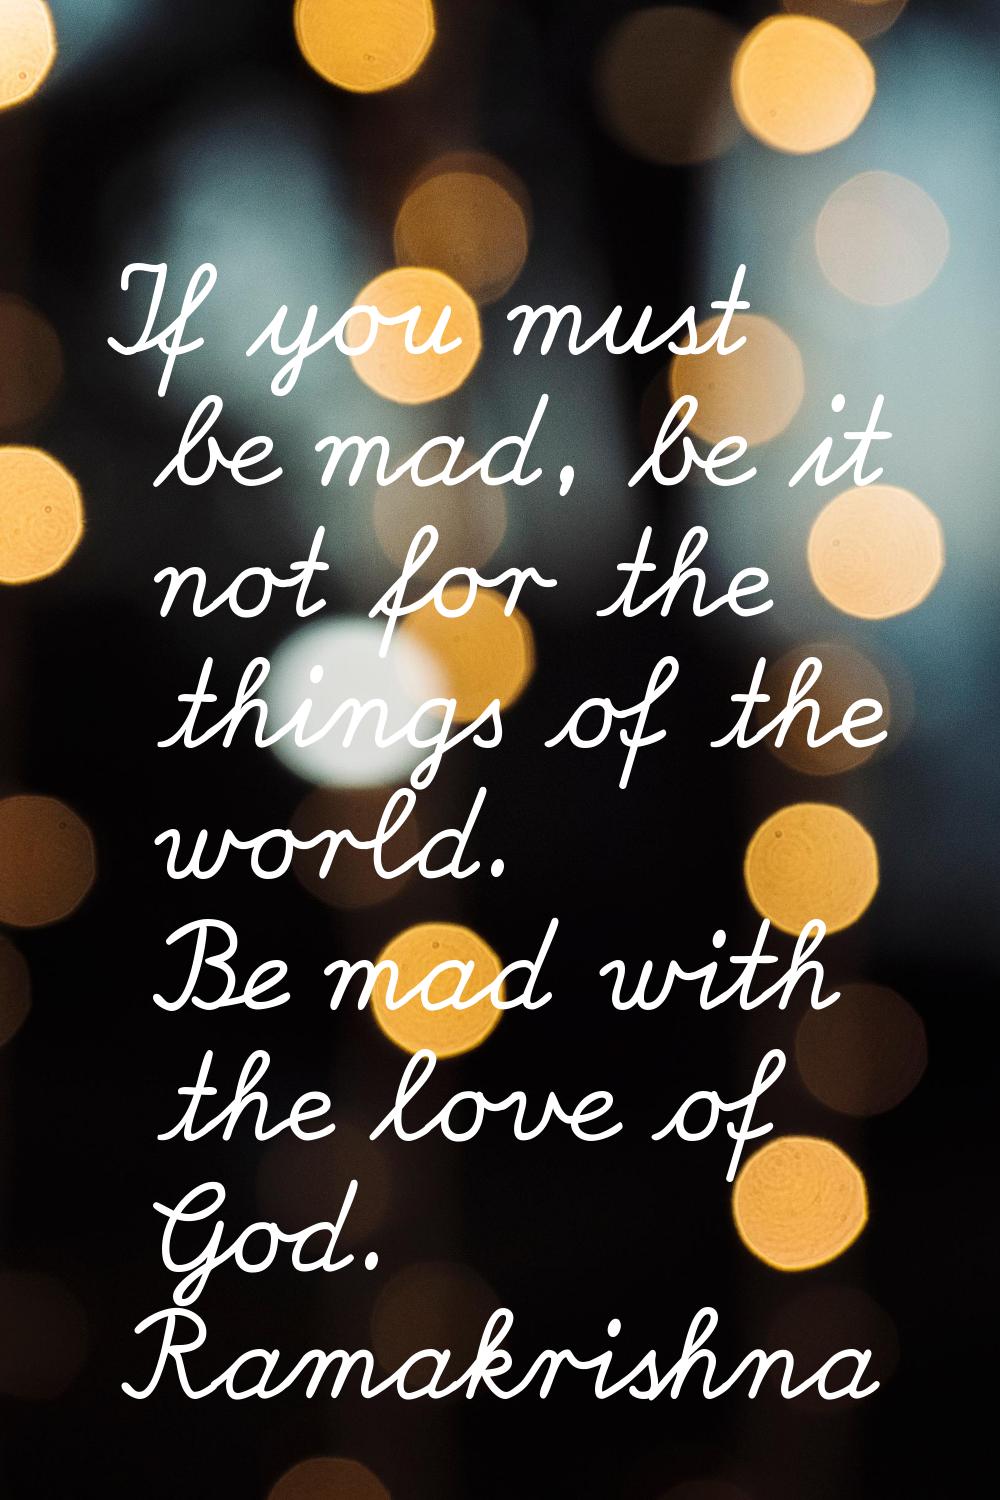 If you must be mad, be it not for the things of the world. Be mad with the love of God.